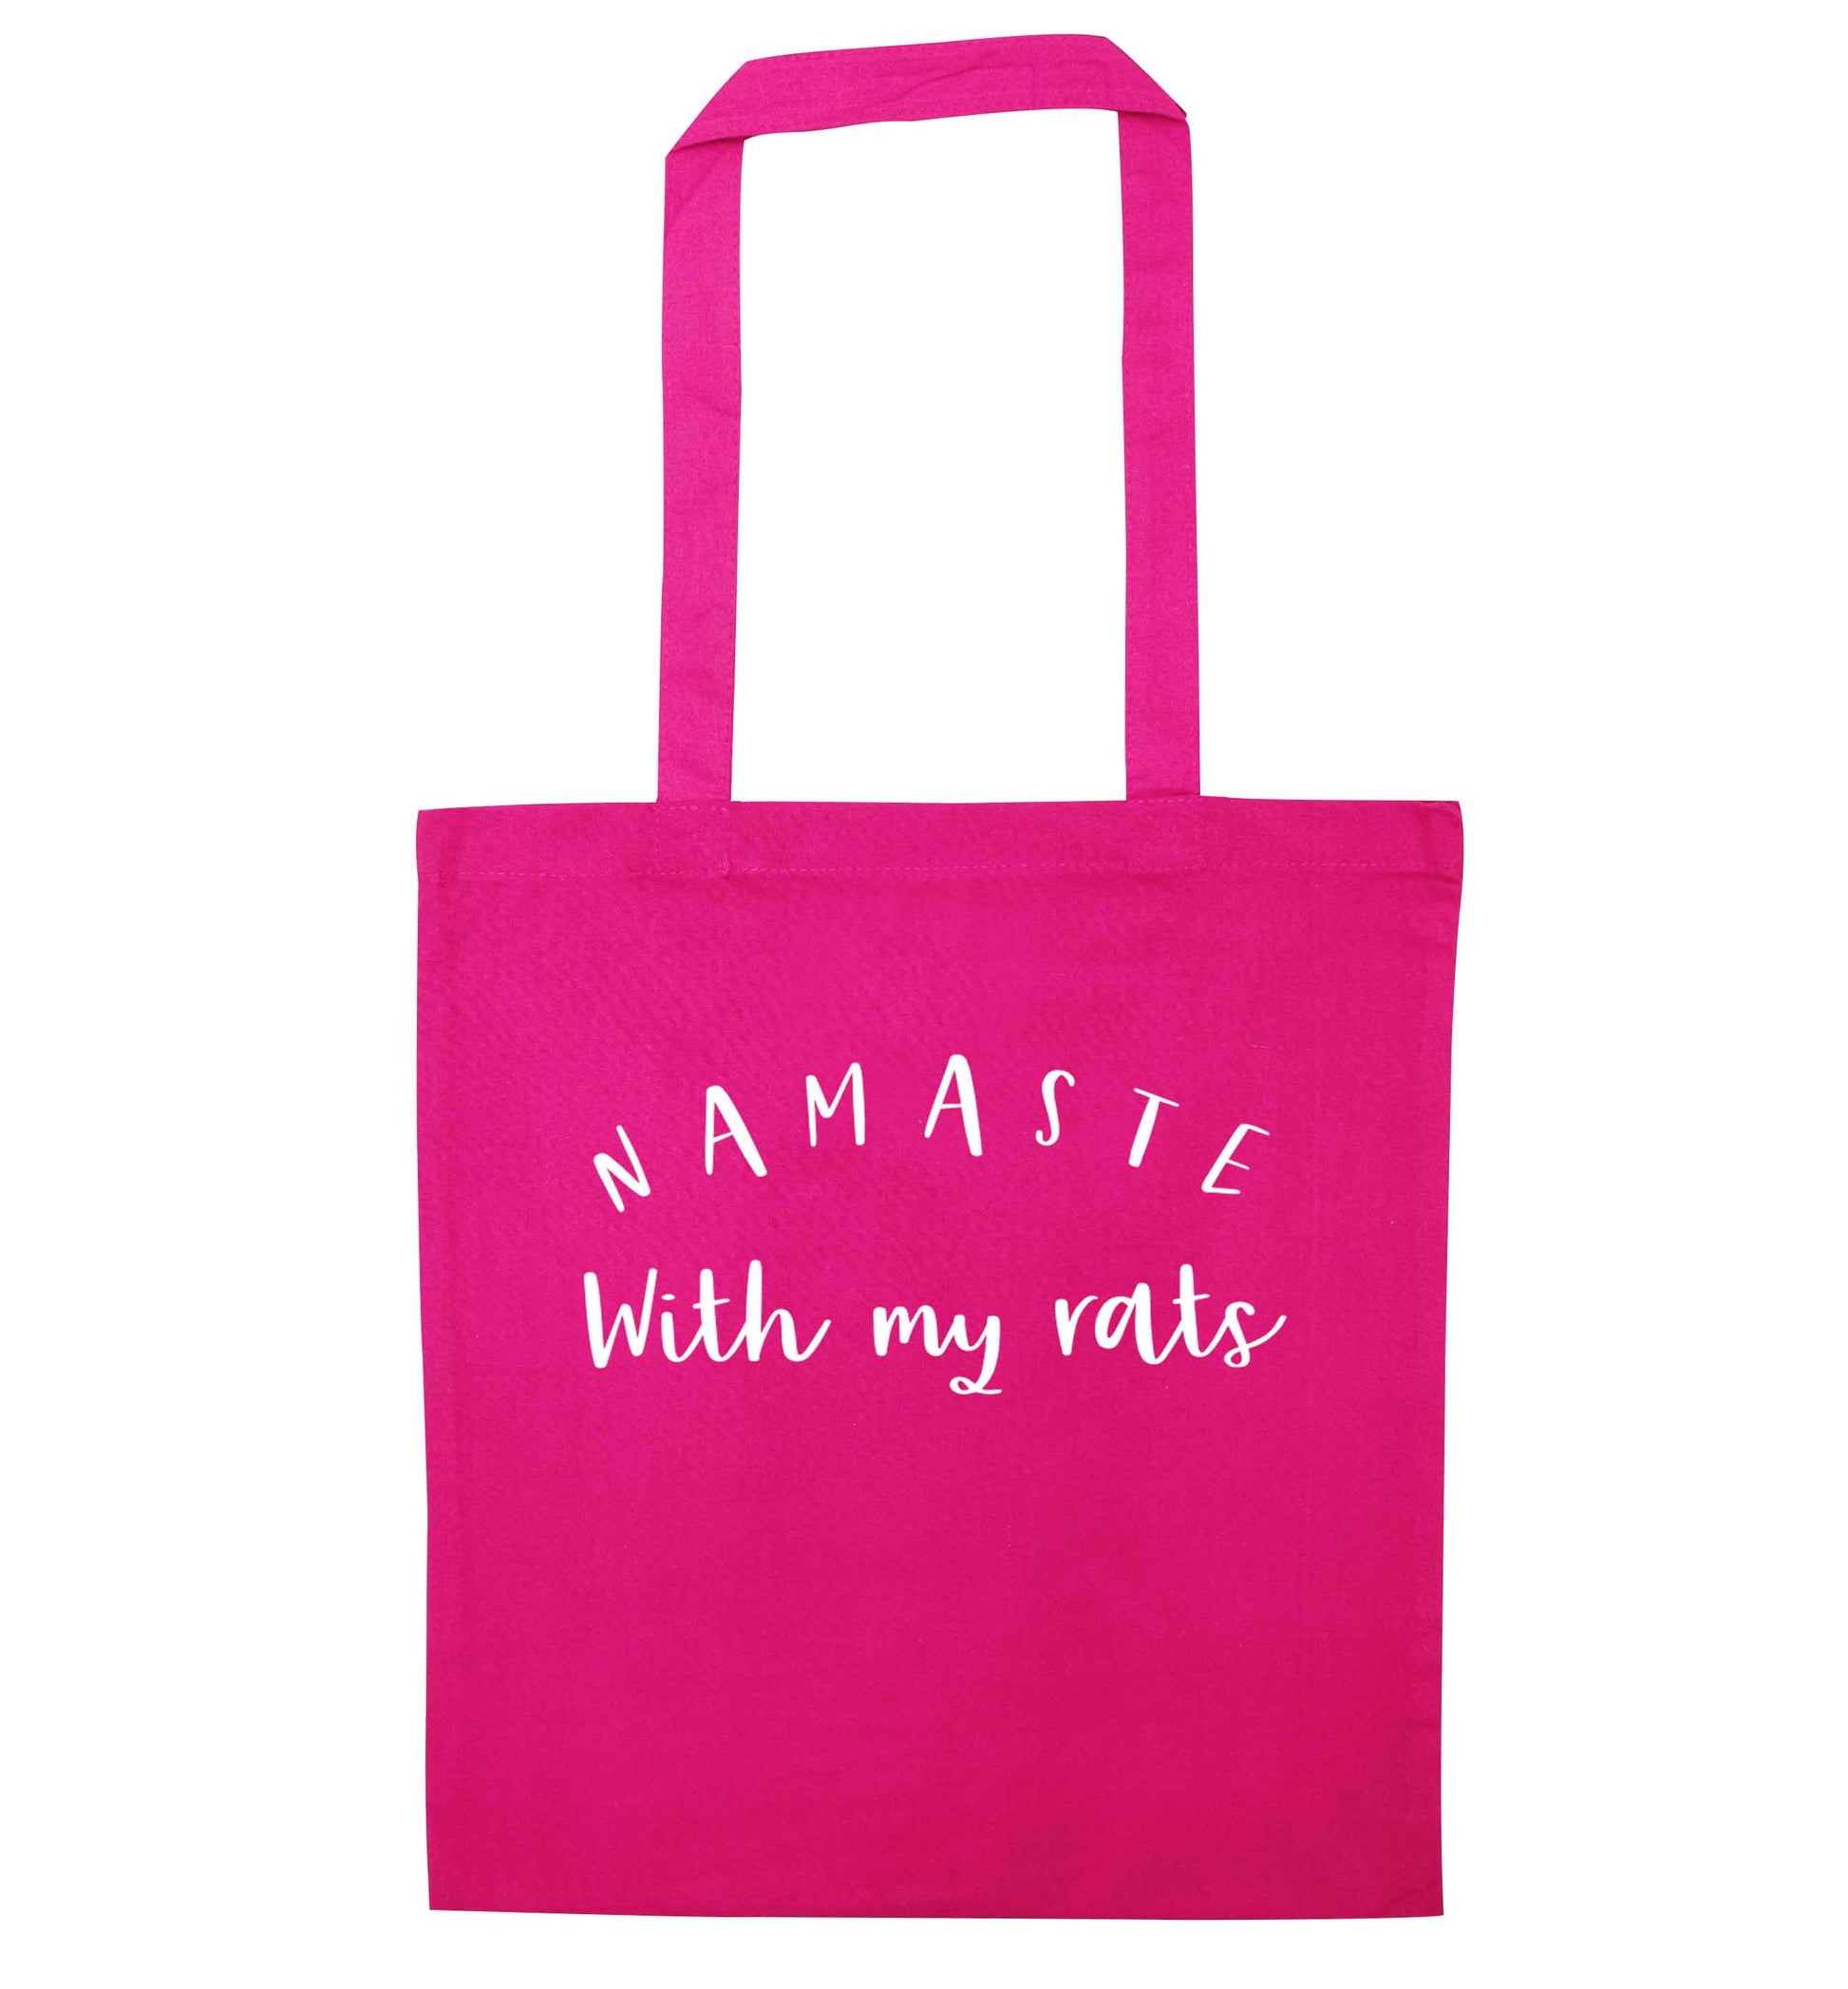 Namaste with my rats pink tote bag